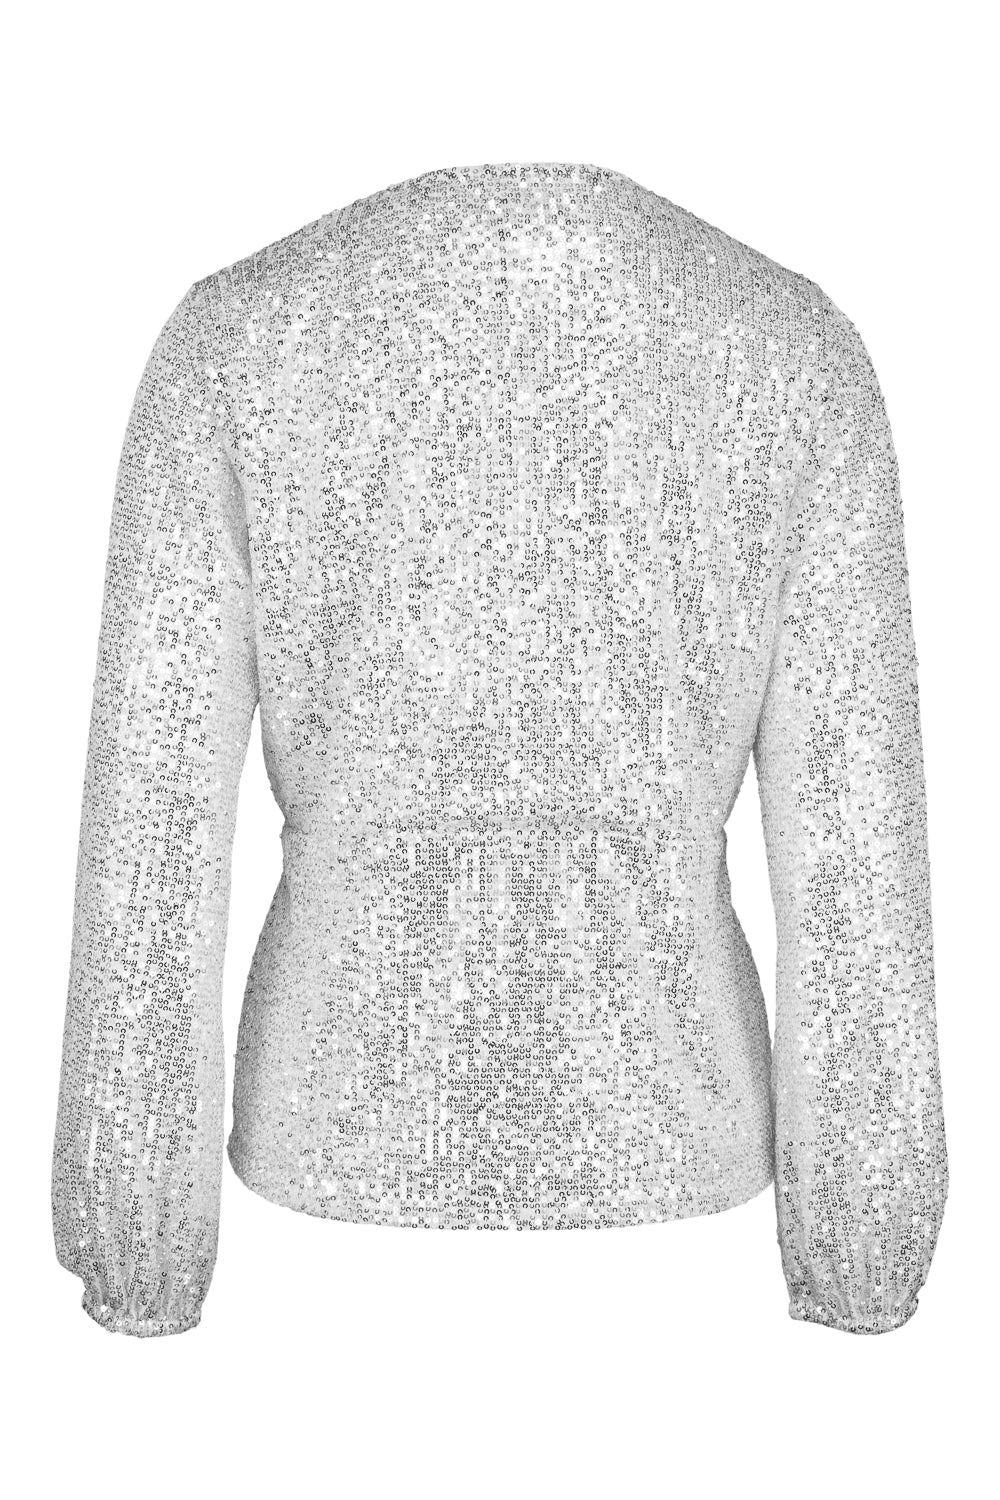 Adeline Blouse Silver Sequins